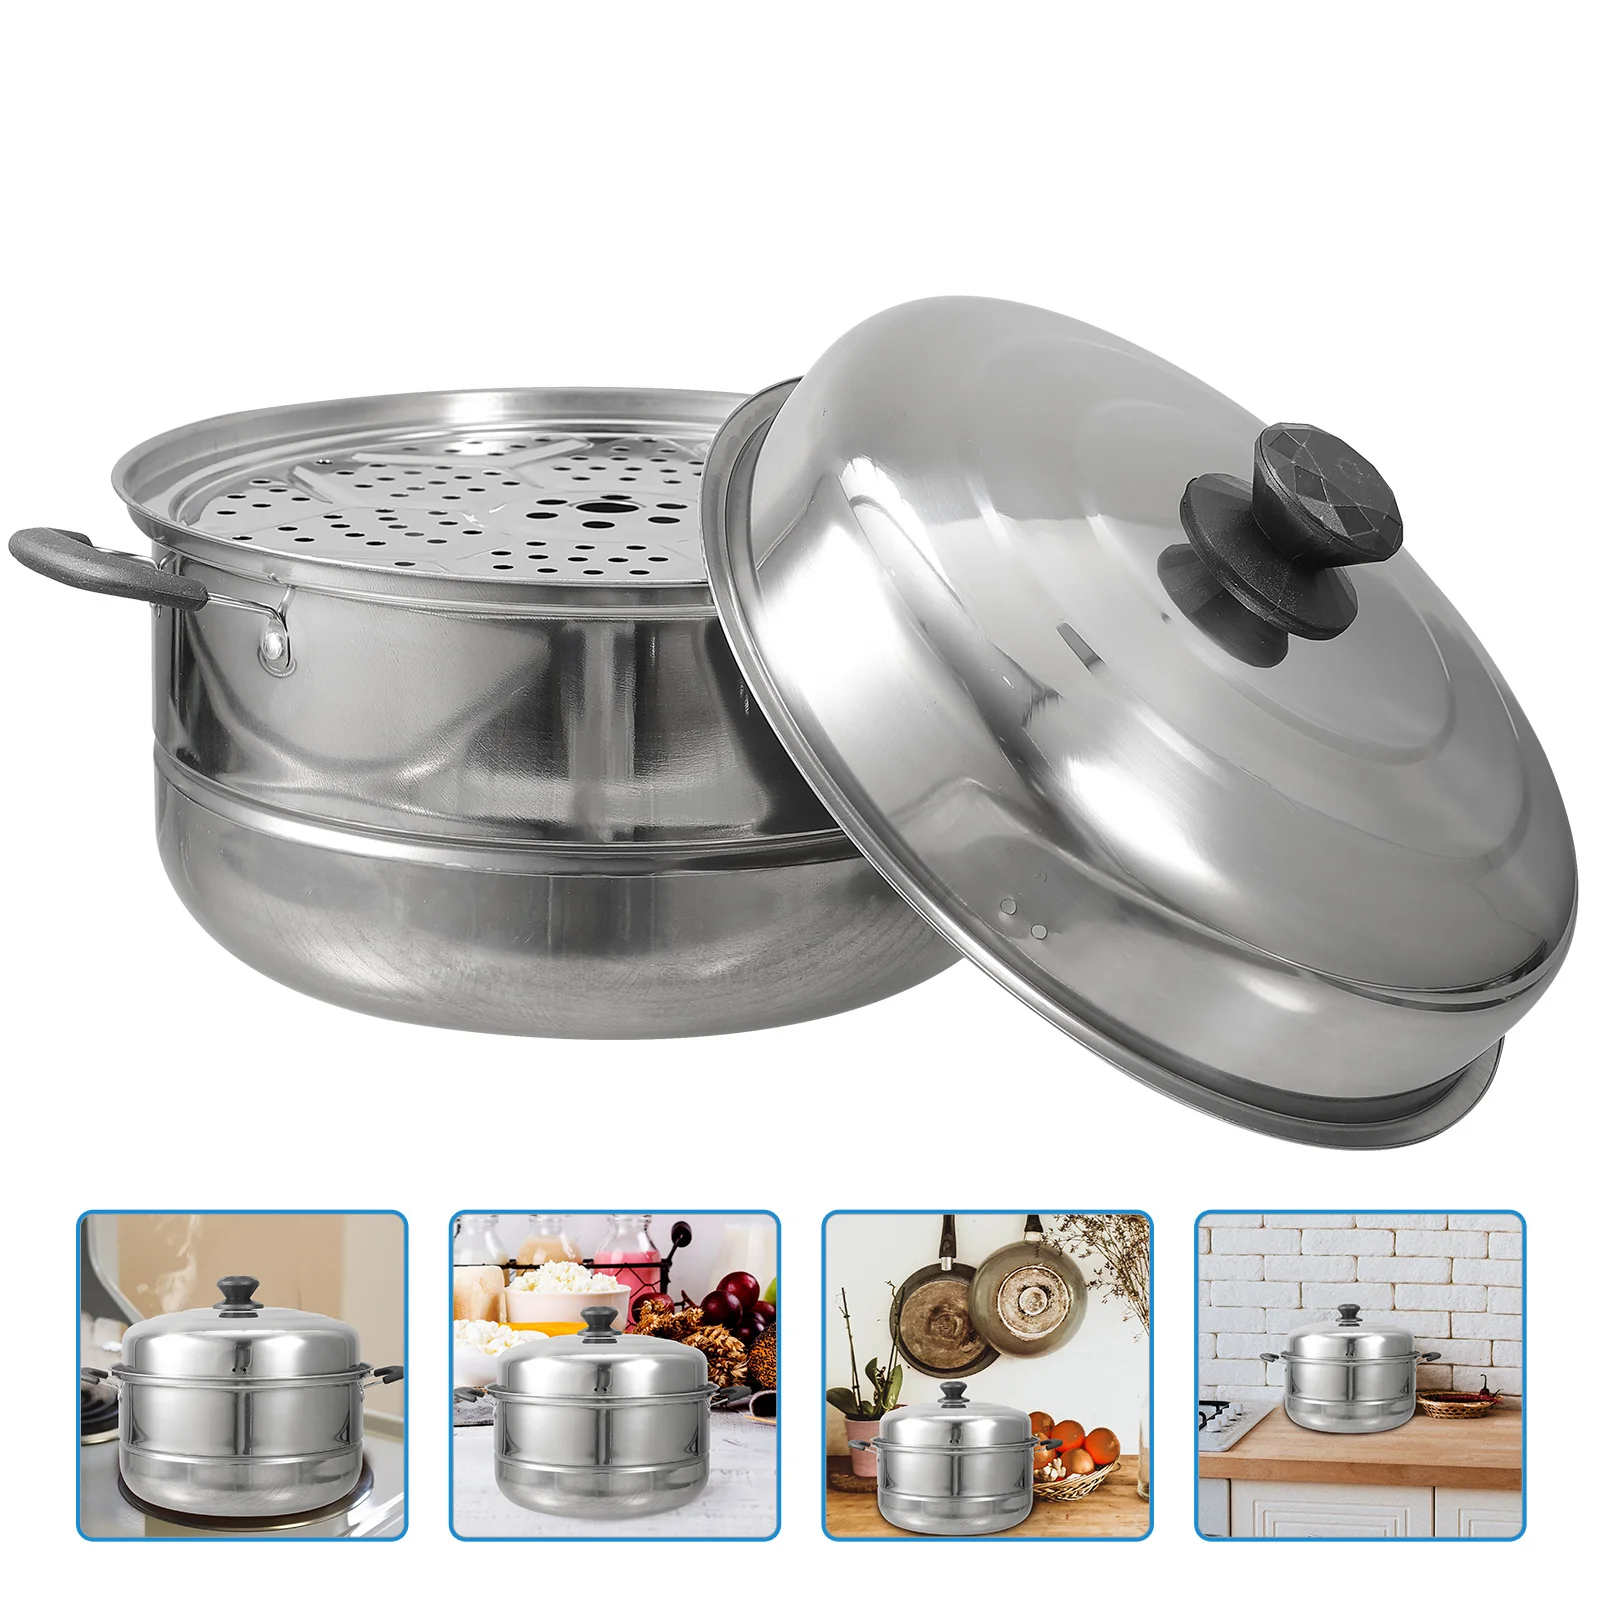 

Stainless Steel Steamer Double-layered Stockpot Food Kitchen Tools Japanese Cookware For cooking